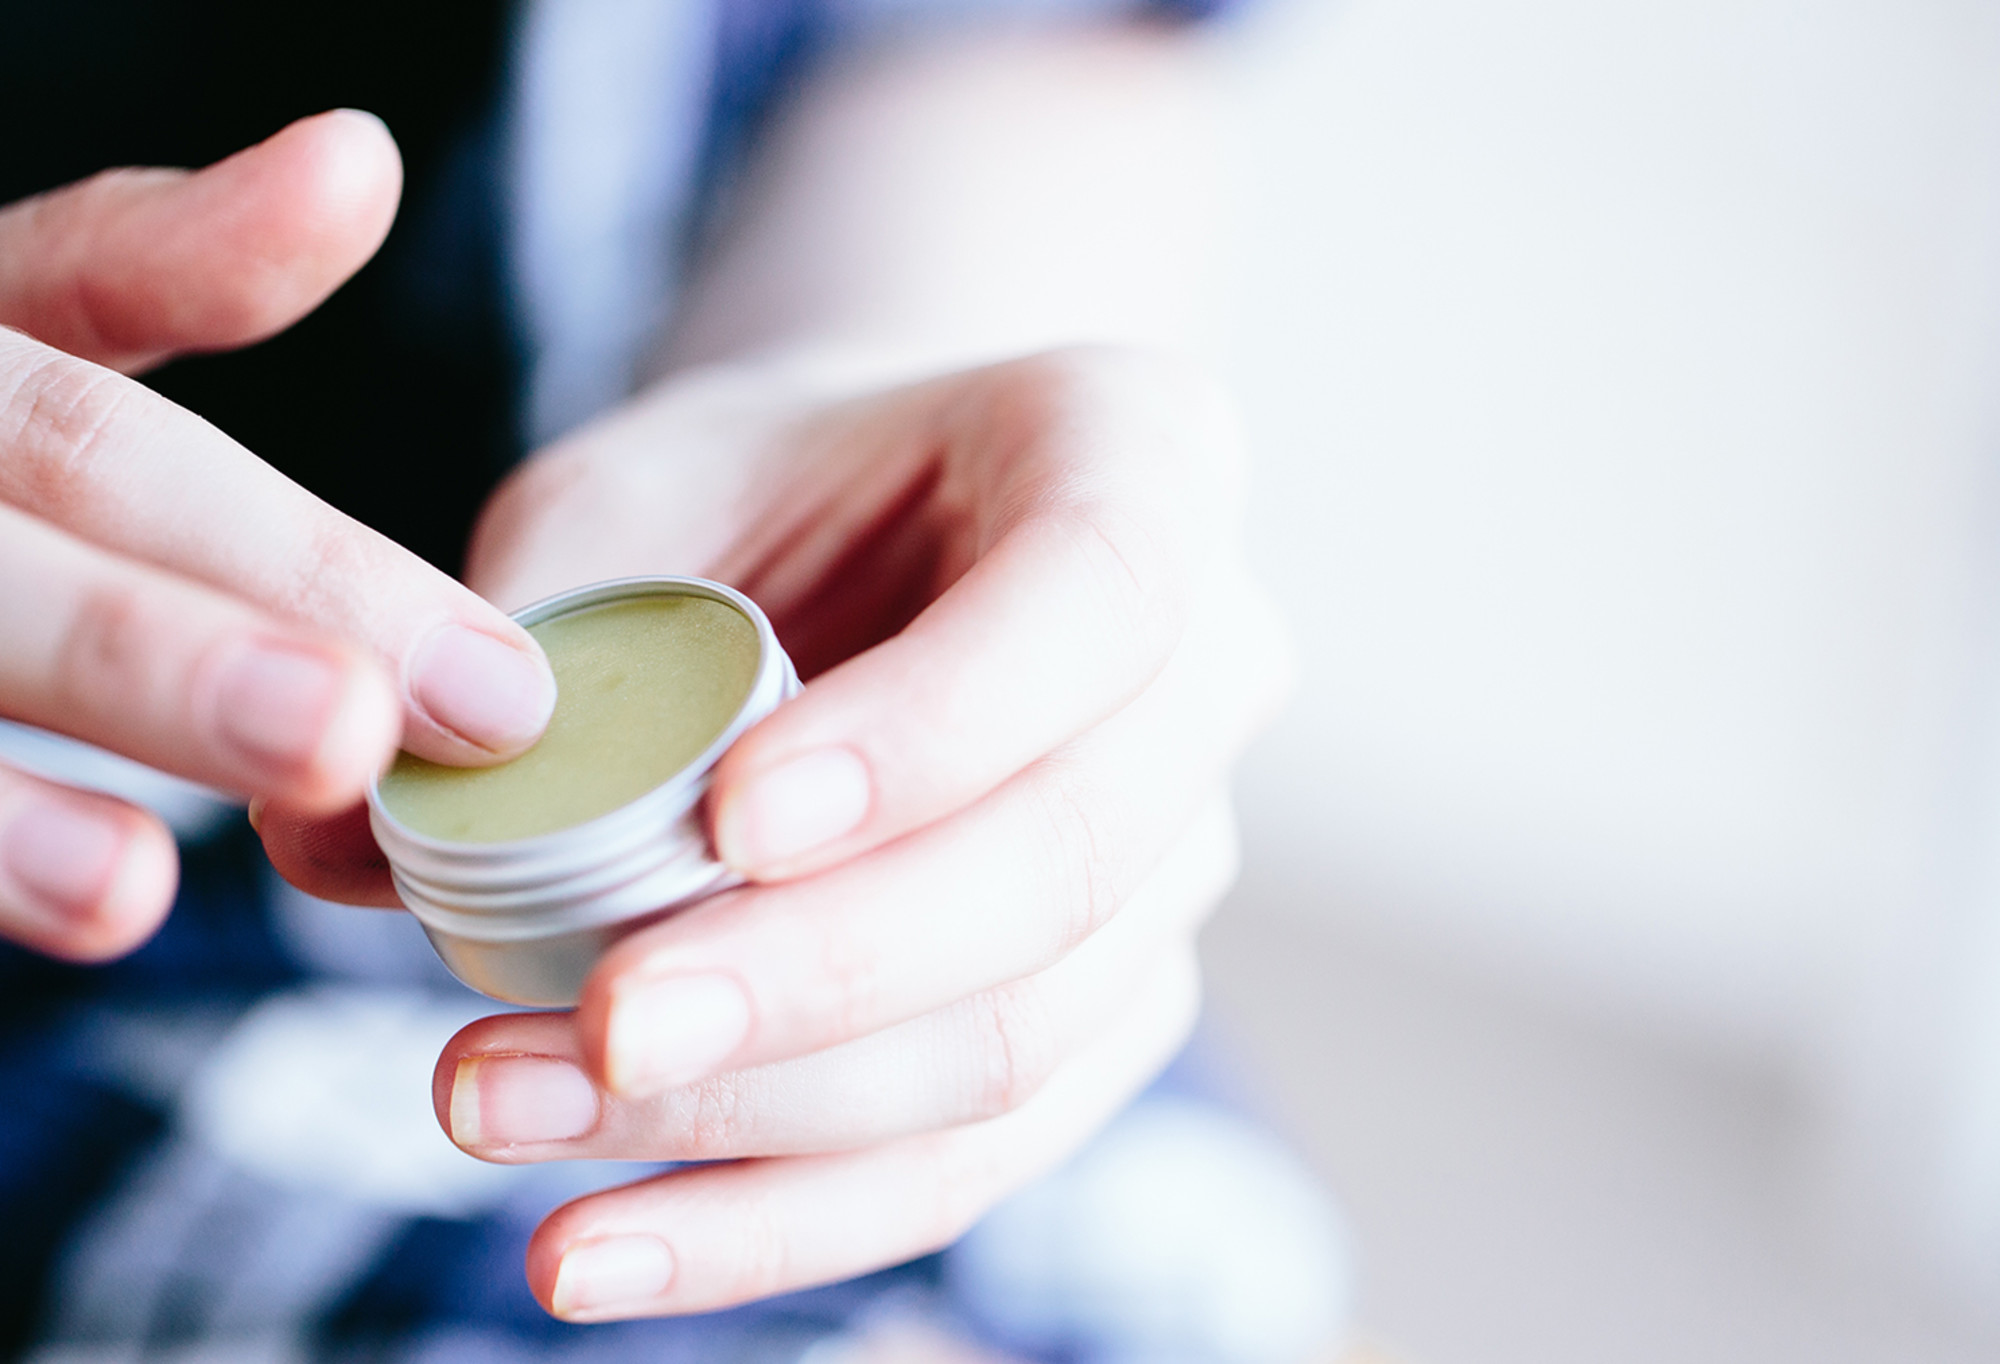 A finger is rubbed in a small round tin of thick, light green Key Lime Pie lip balm.